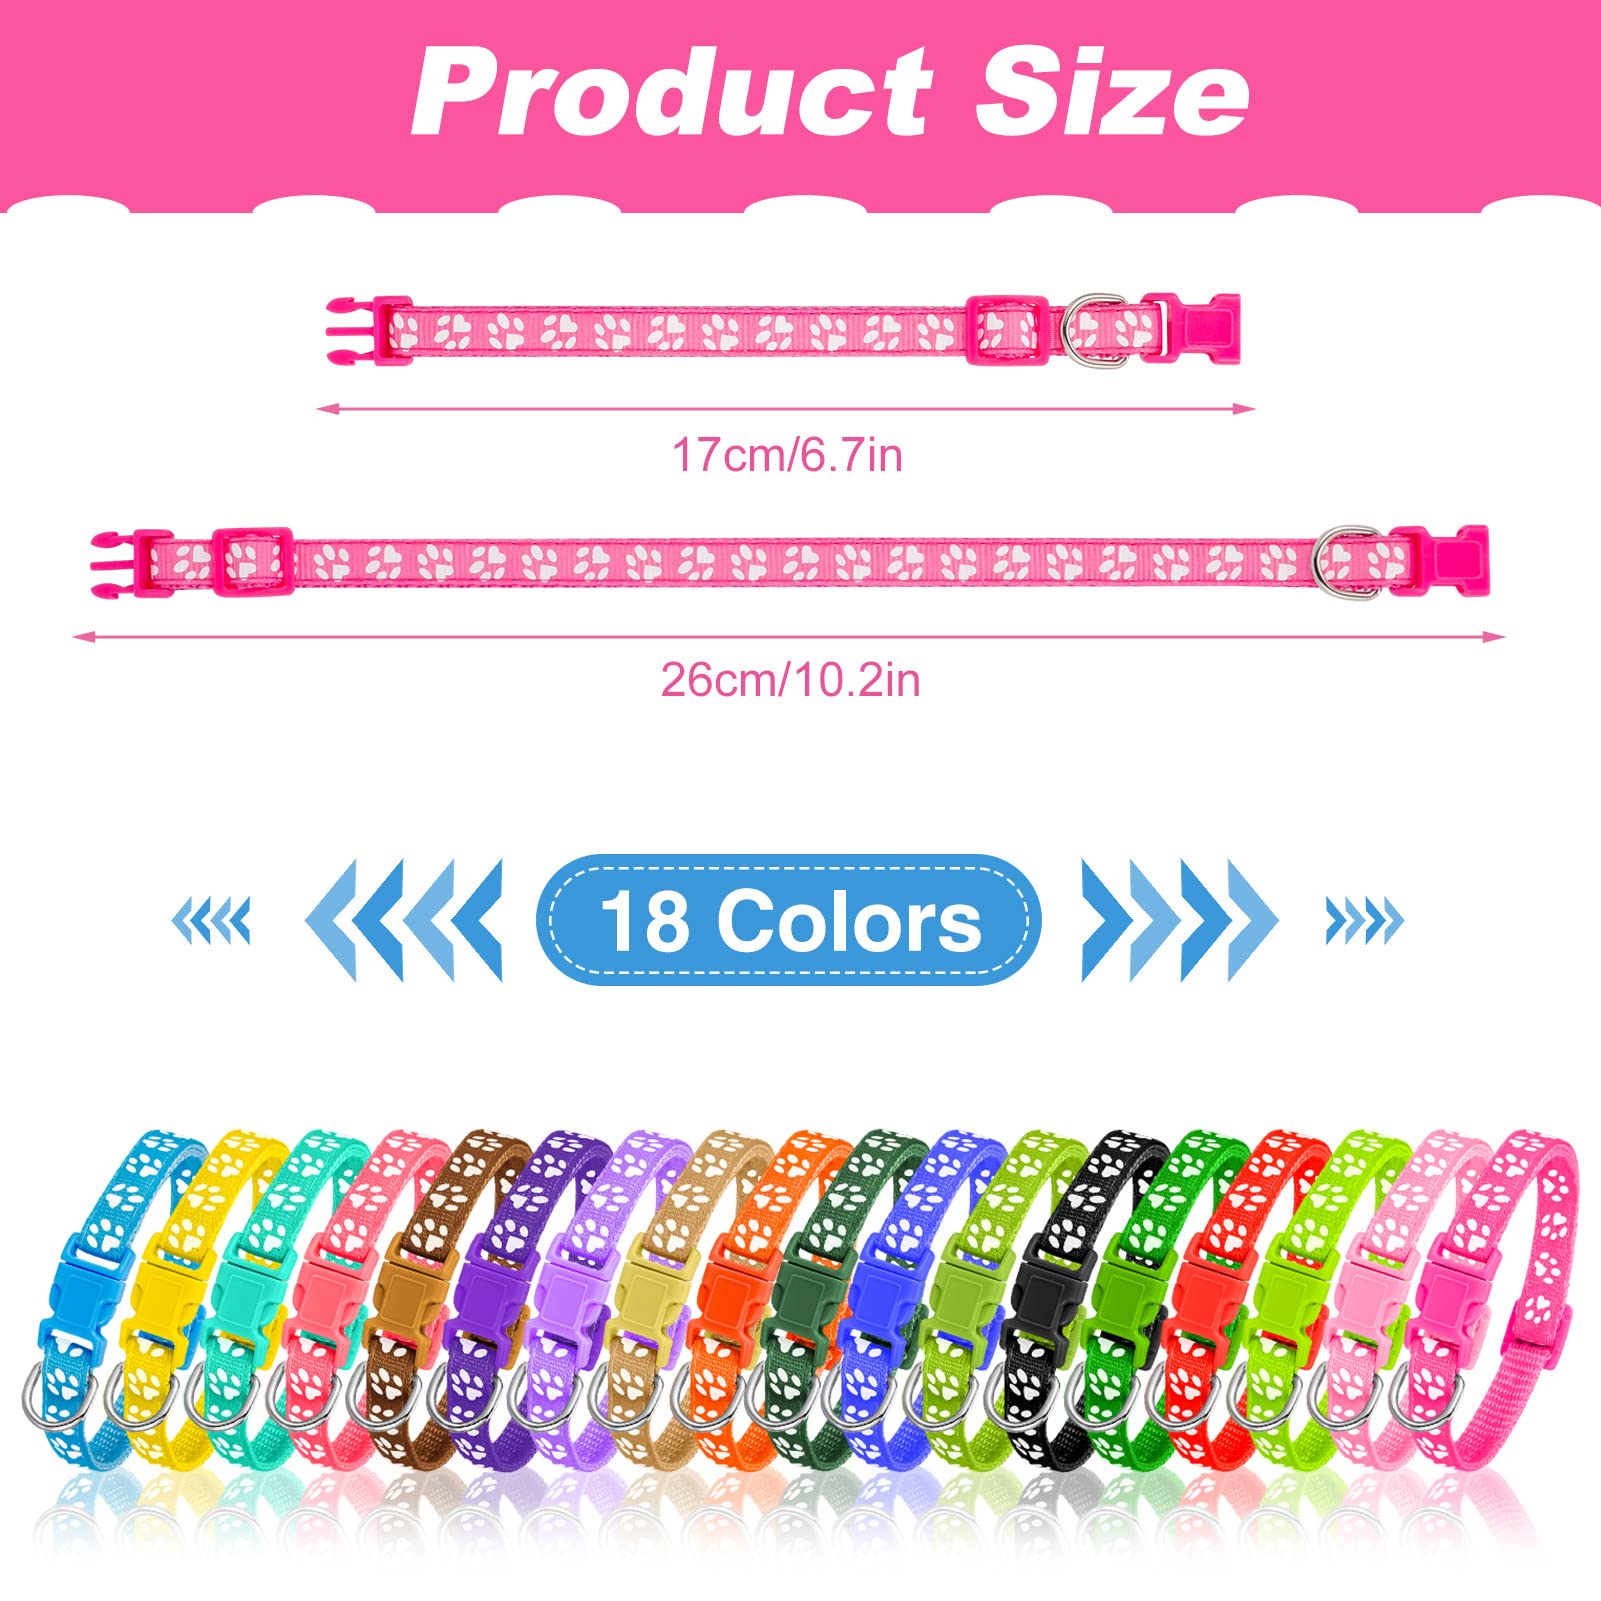 BOUMUSOE 18 Pcs Puppy Collars for Litter Adjustable Puppy Whelping Collars Soft Nylon Puppy ID Collars with Safety Quick Release Buckle for Small Medium Dogs( 17-26cm )